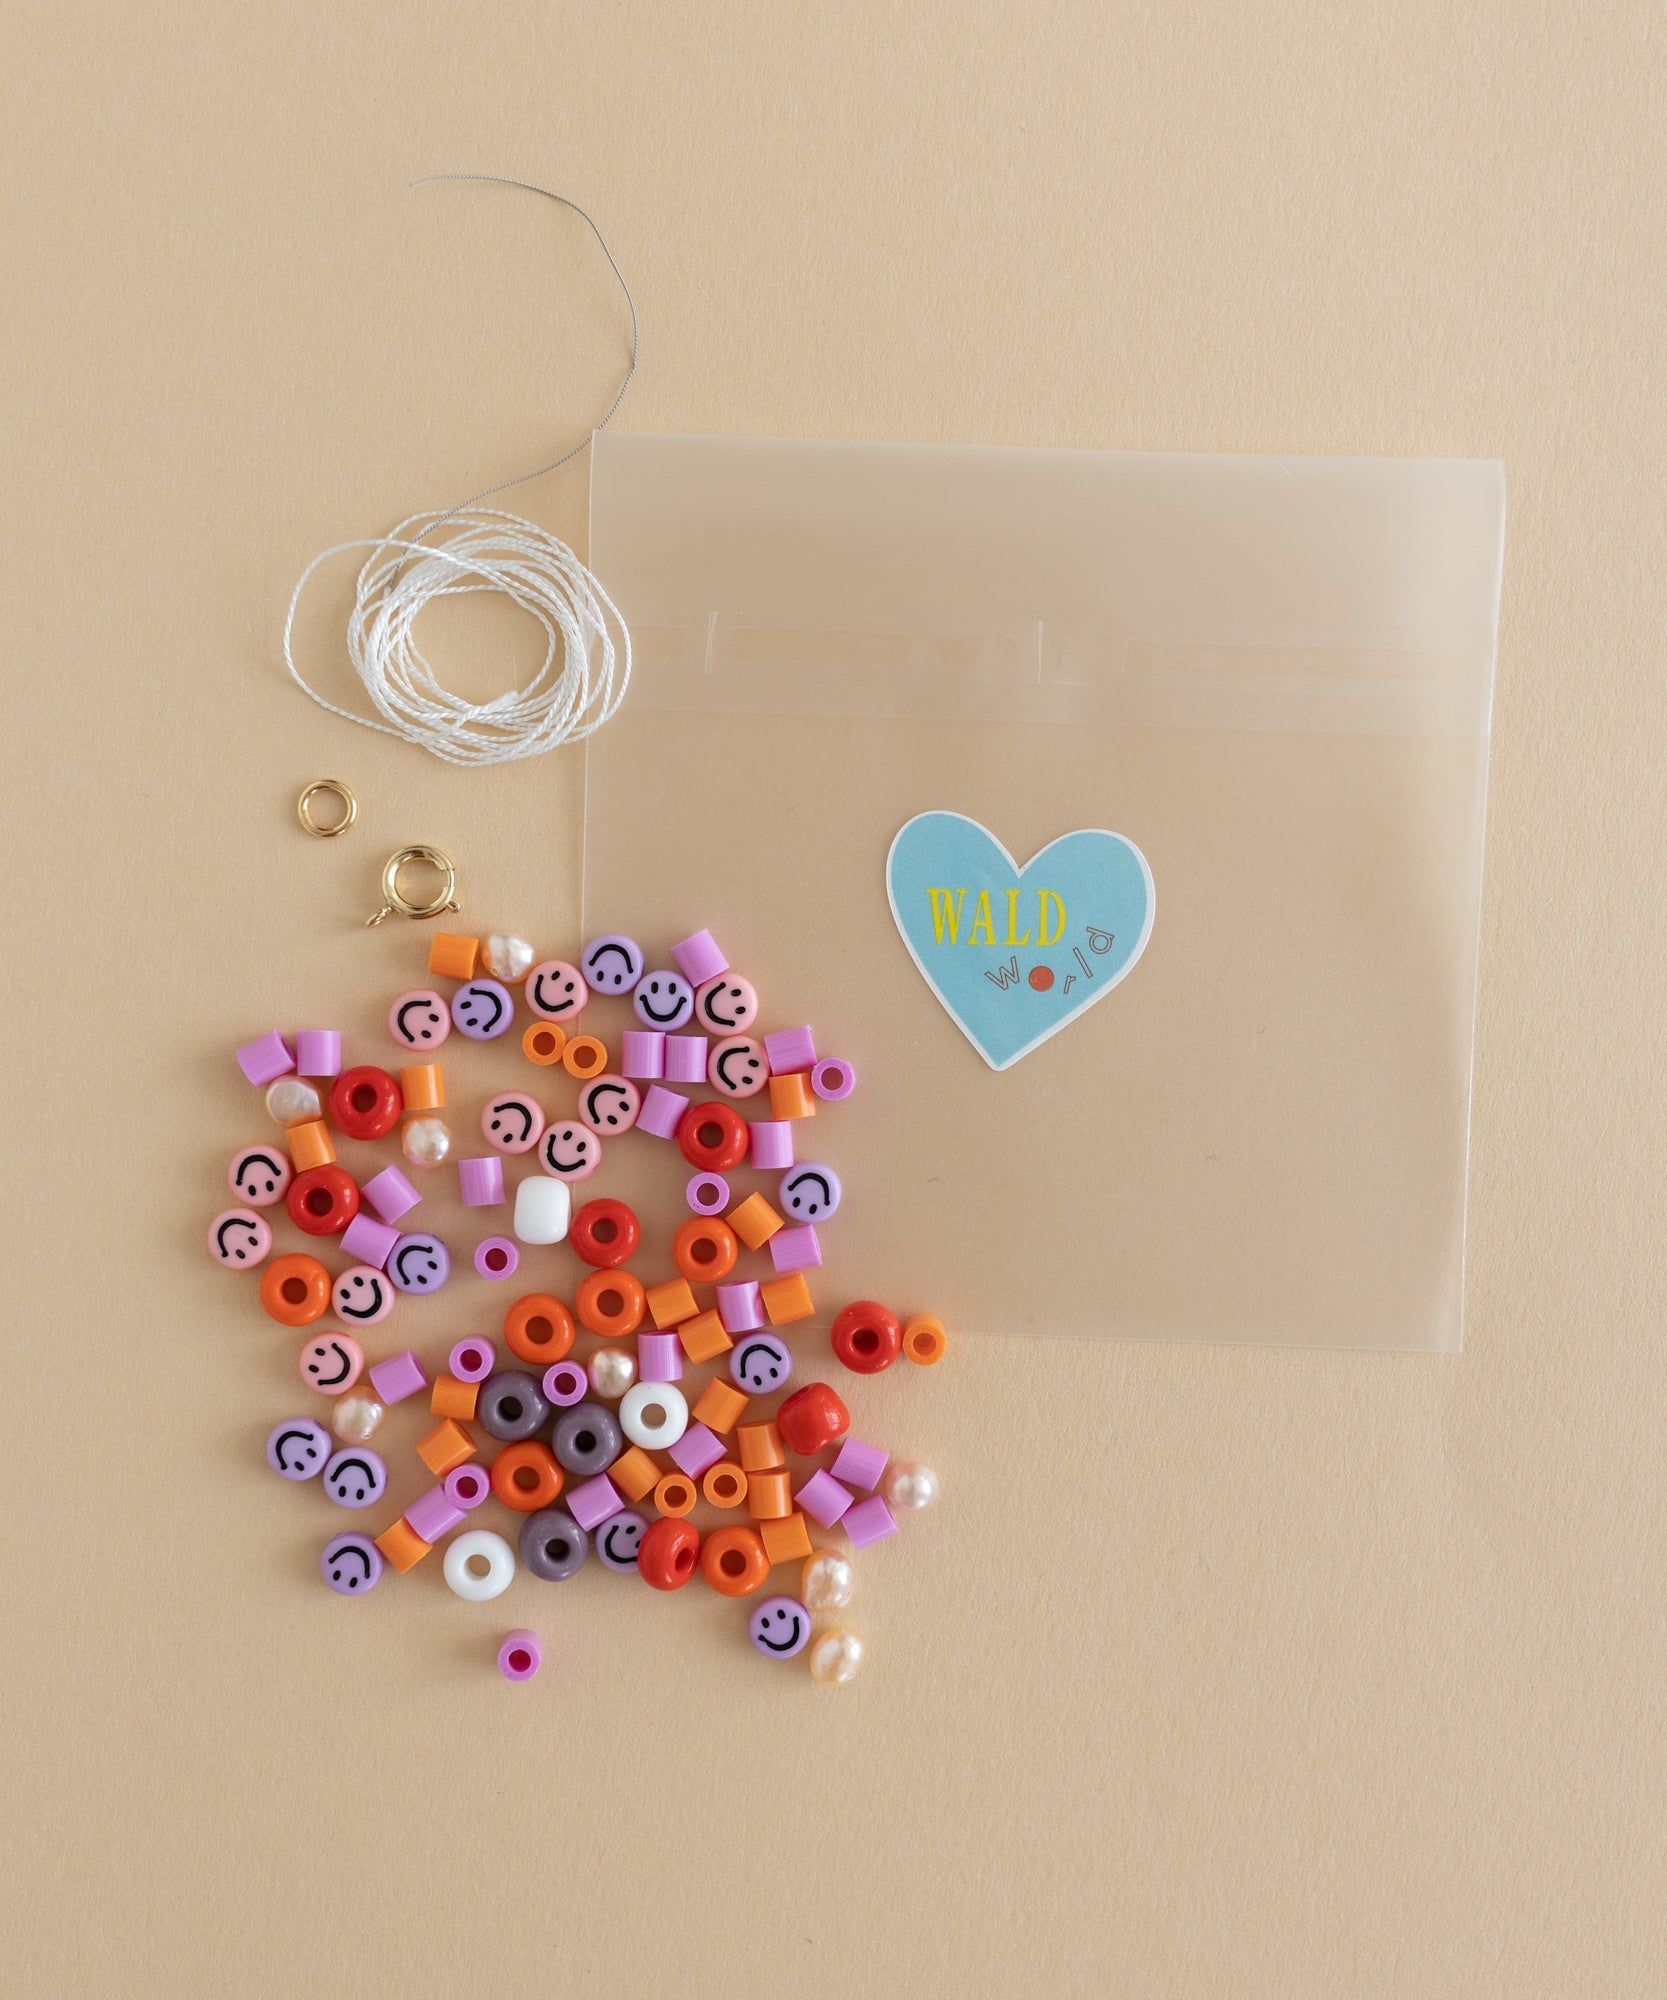 A DIY Candyman Kit Rose bag with beaded jewelry accents.